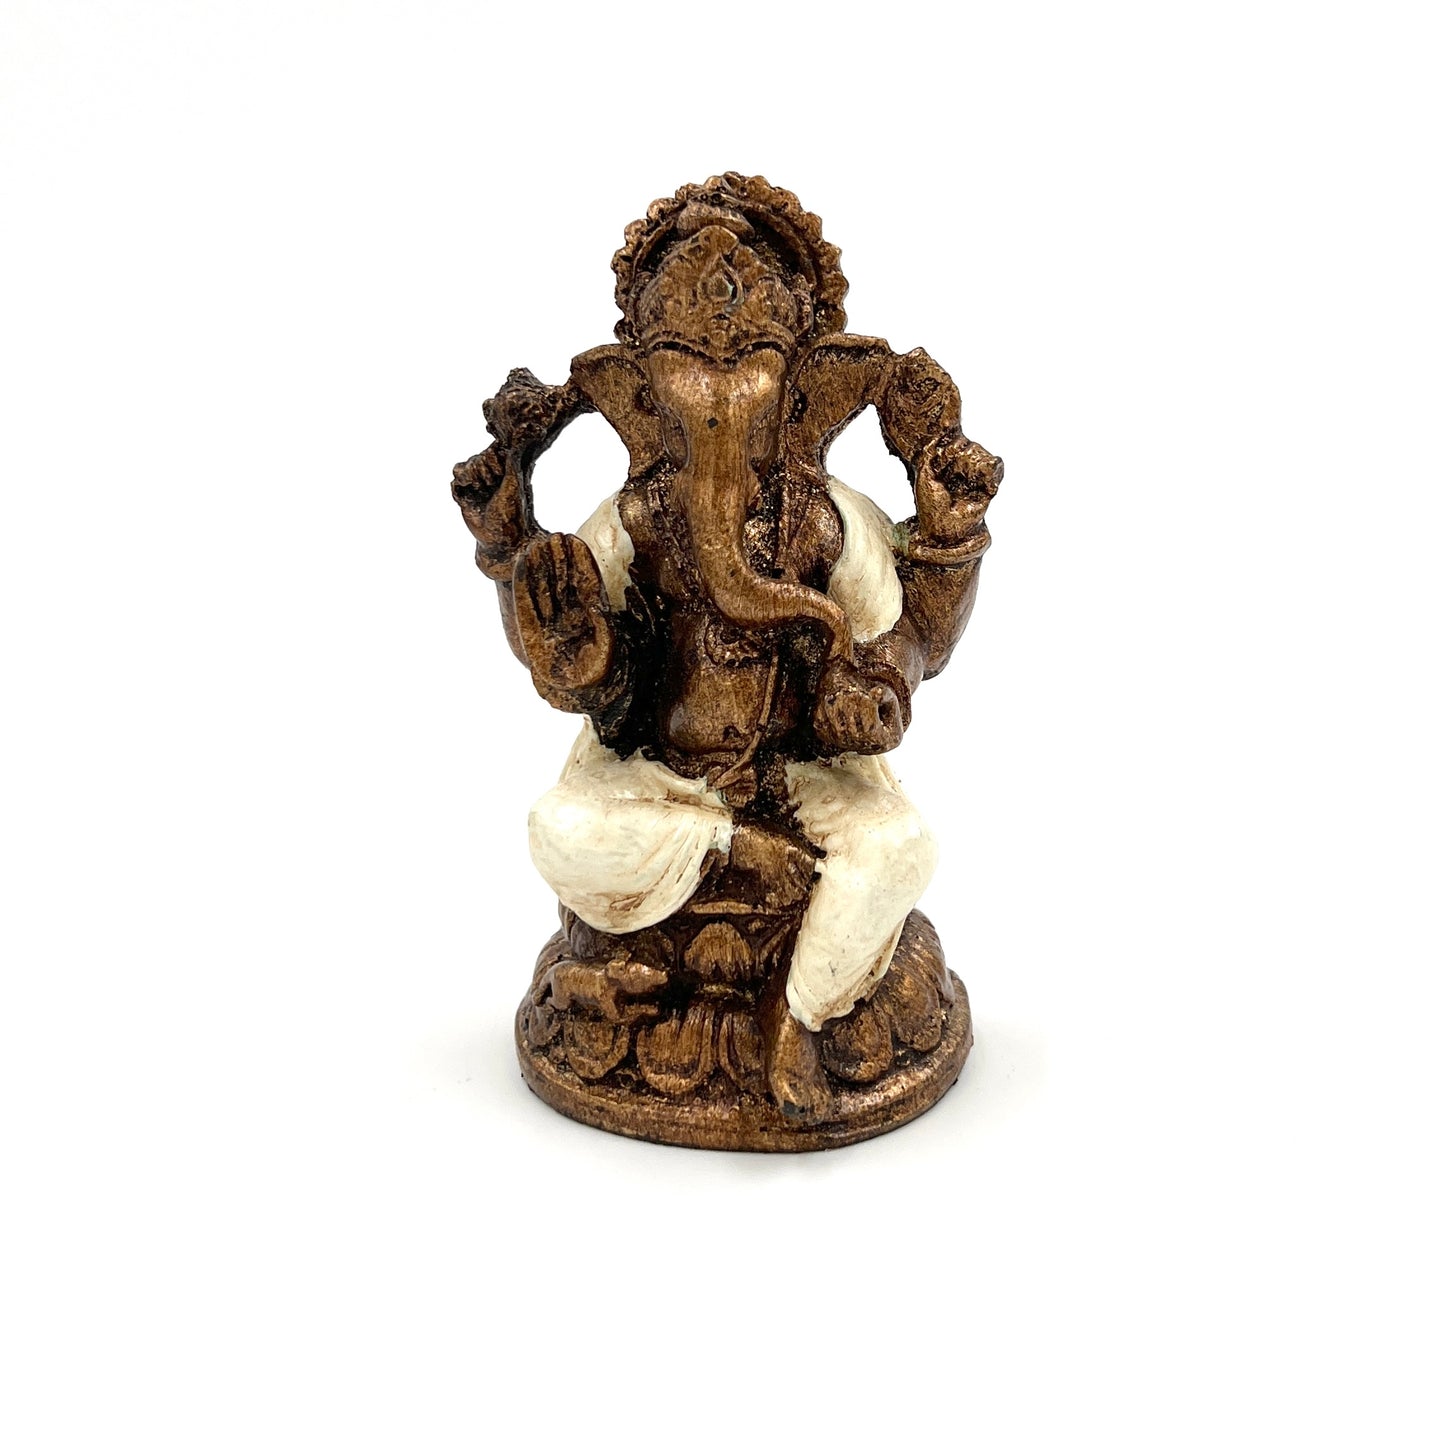 Hand Painted Resin Ganesh Statues